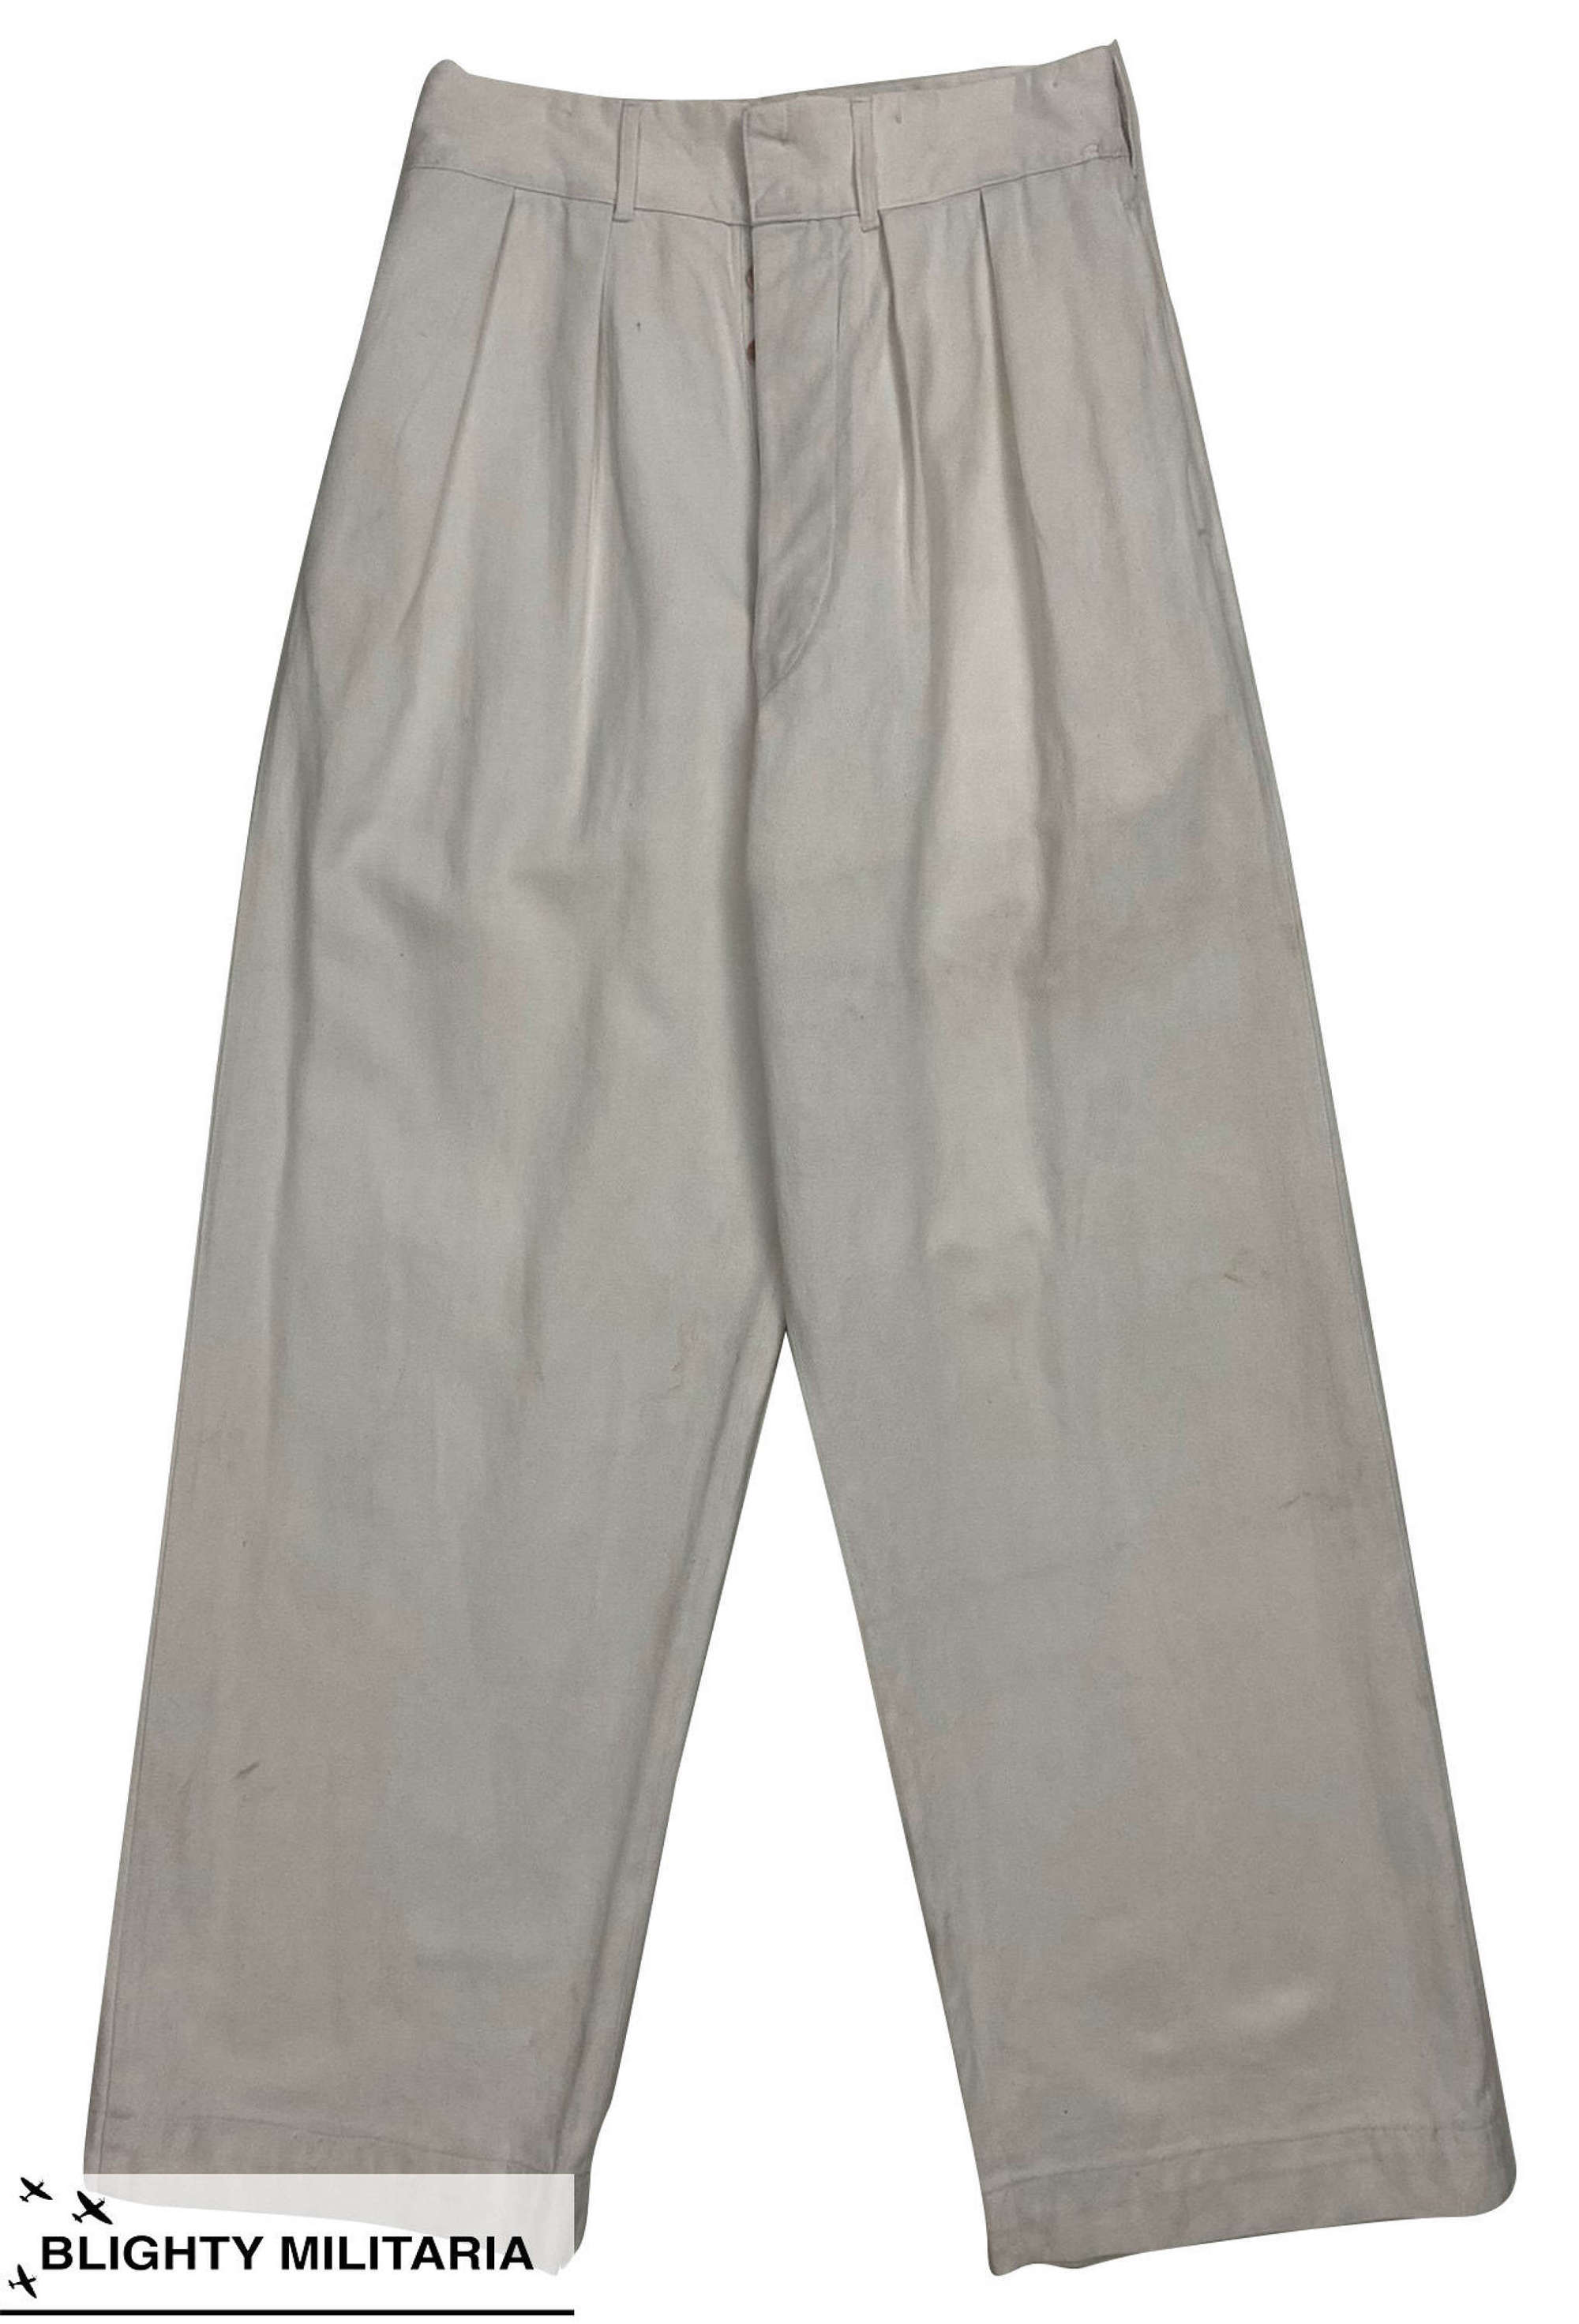 Original 1940s British Royal Navy White Cotton Officer's Trousers